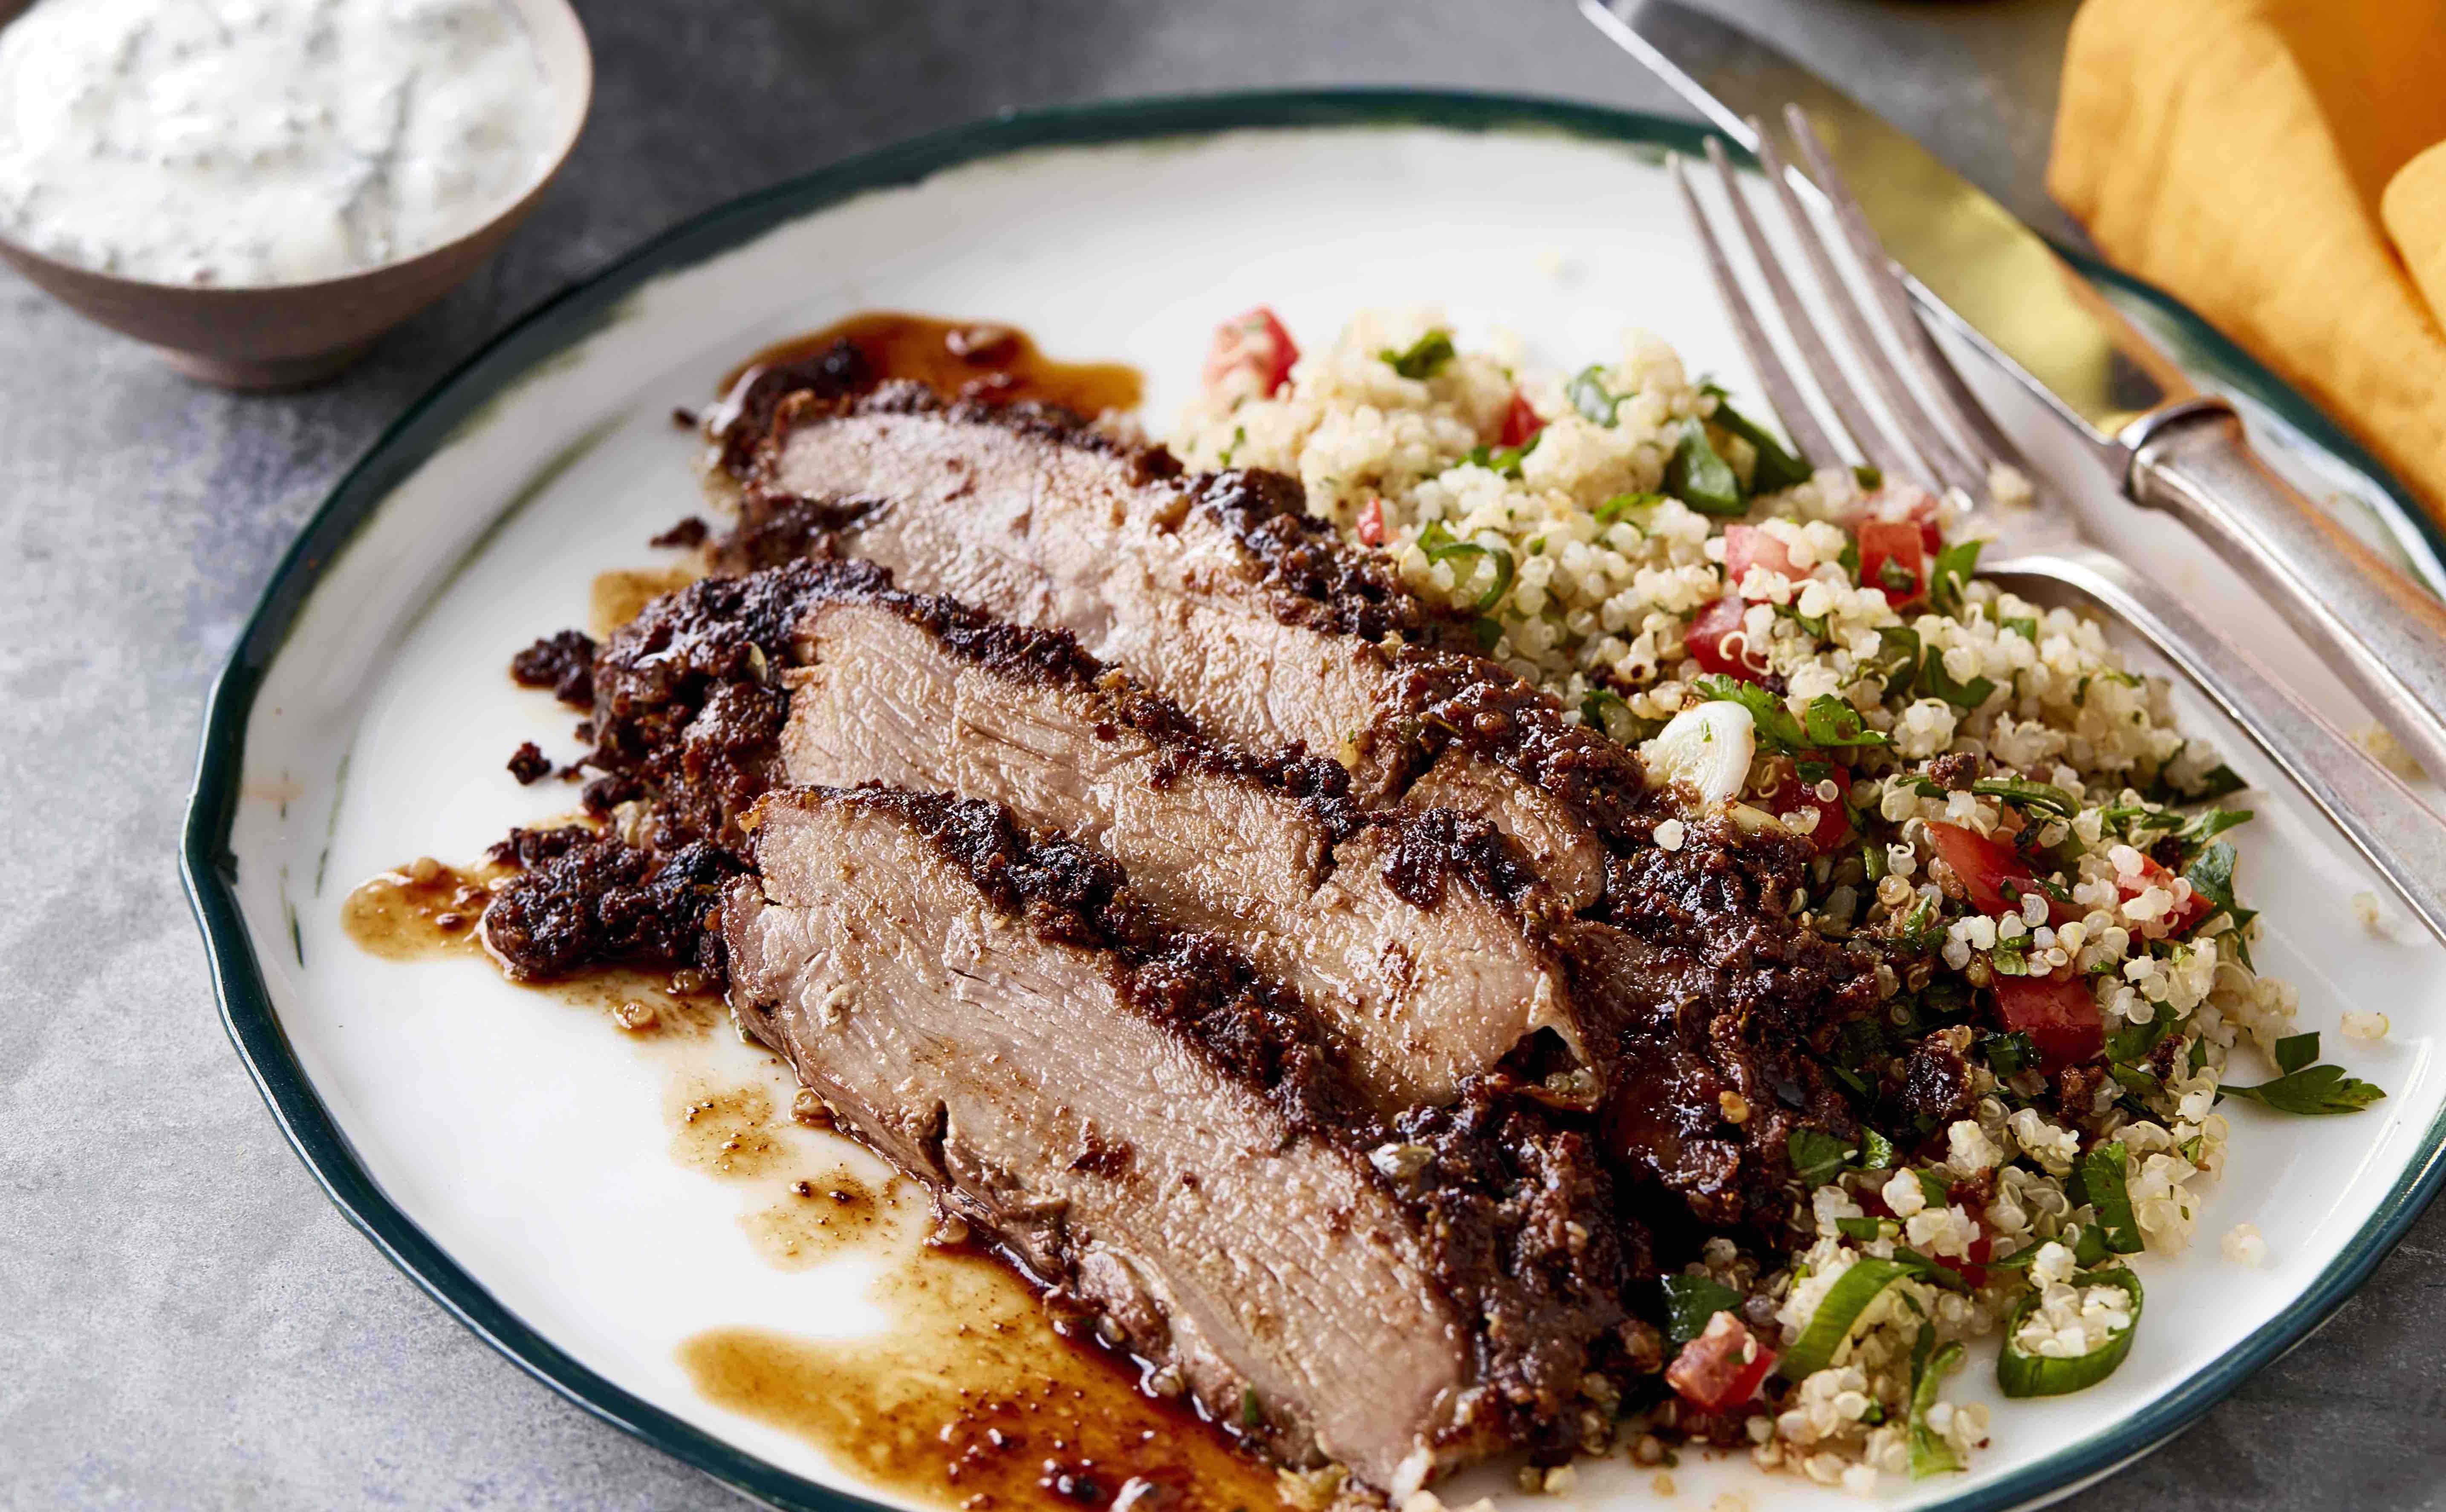 A lamb recipe you can’t miss out on